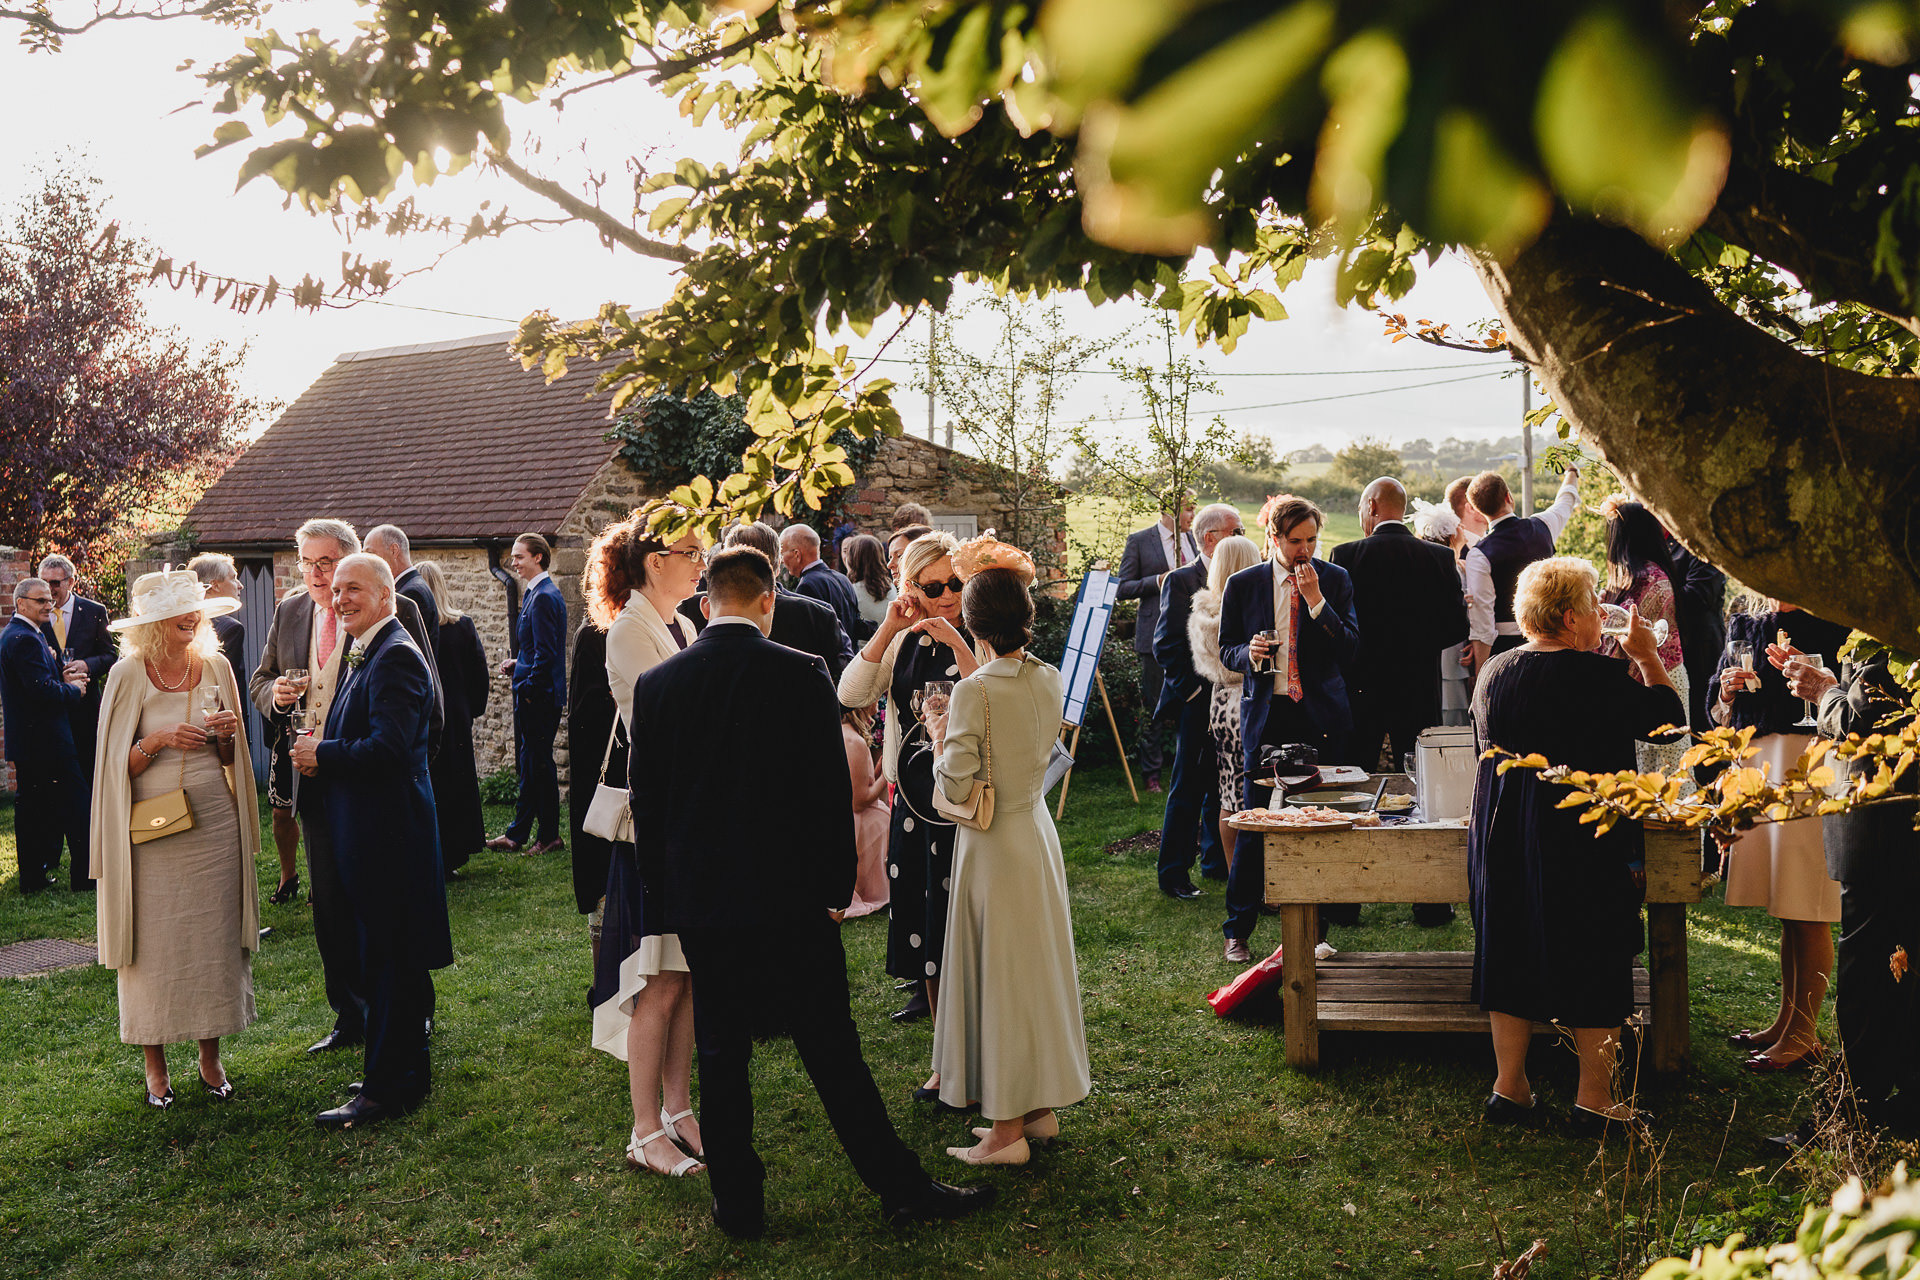 Wedding guests enjoying drinks and food in a garden